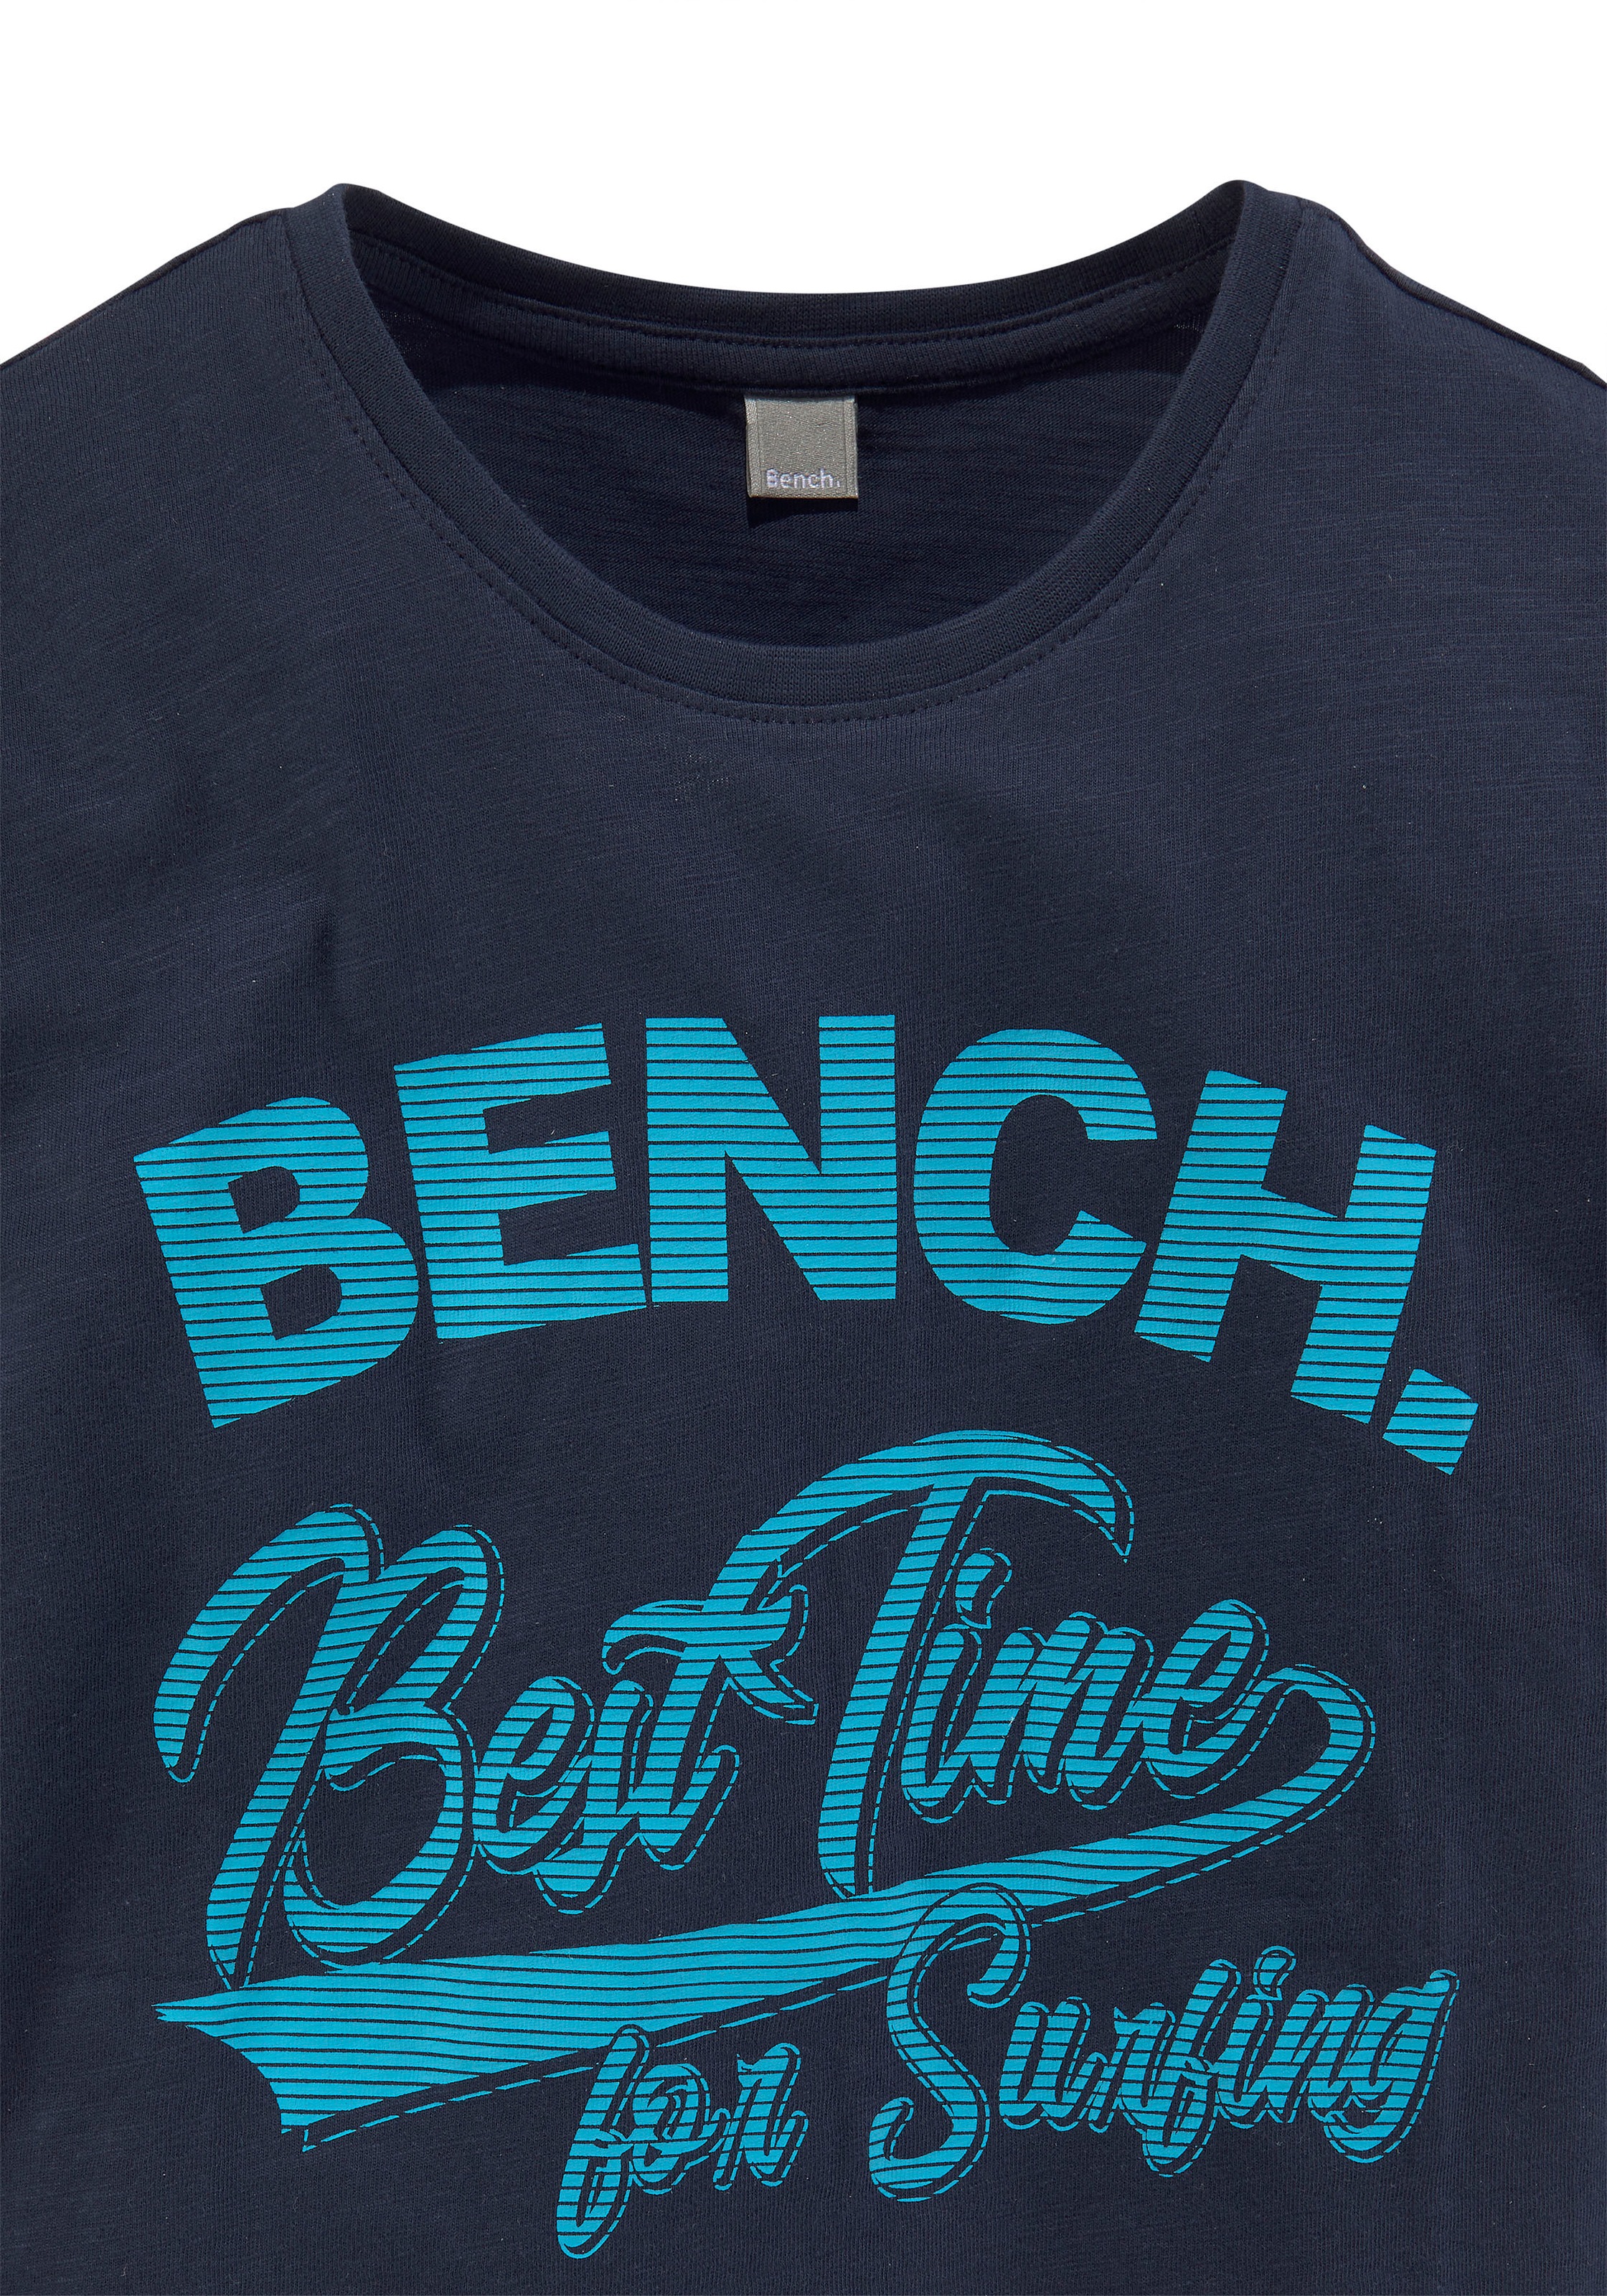 time surfing« OTTO for Bench. T-Shirt »Best bei